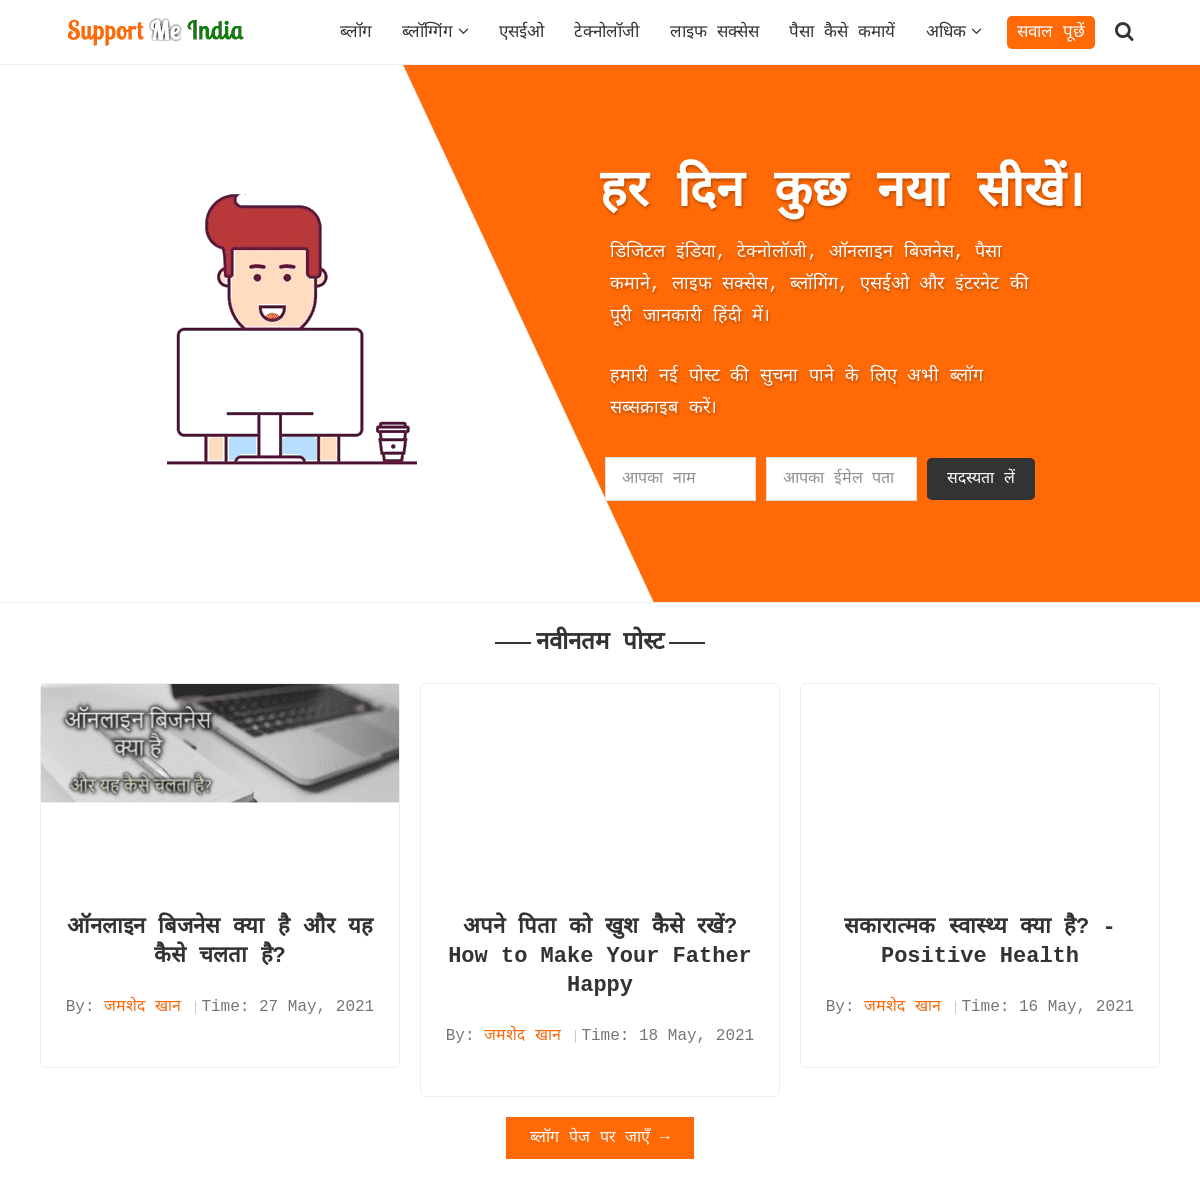 A complete backup of https://supportmeindia.com